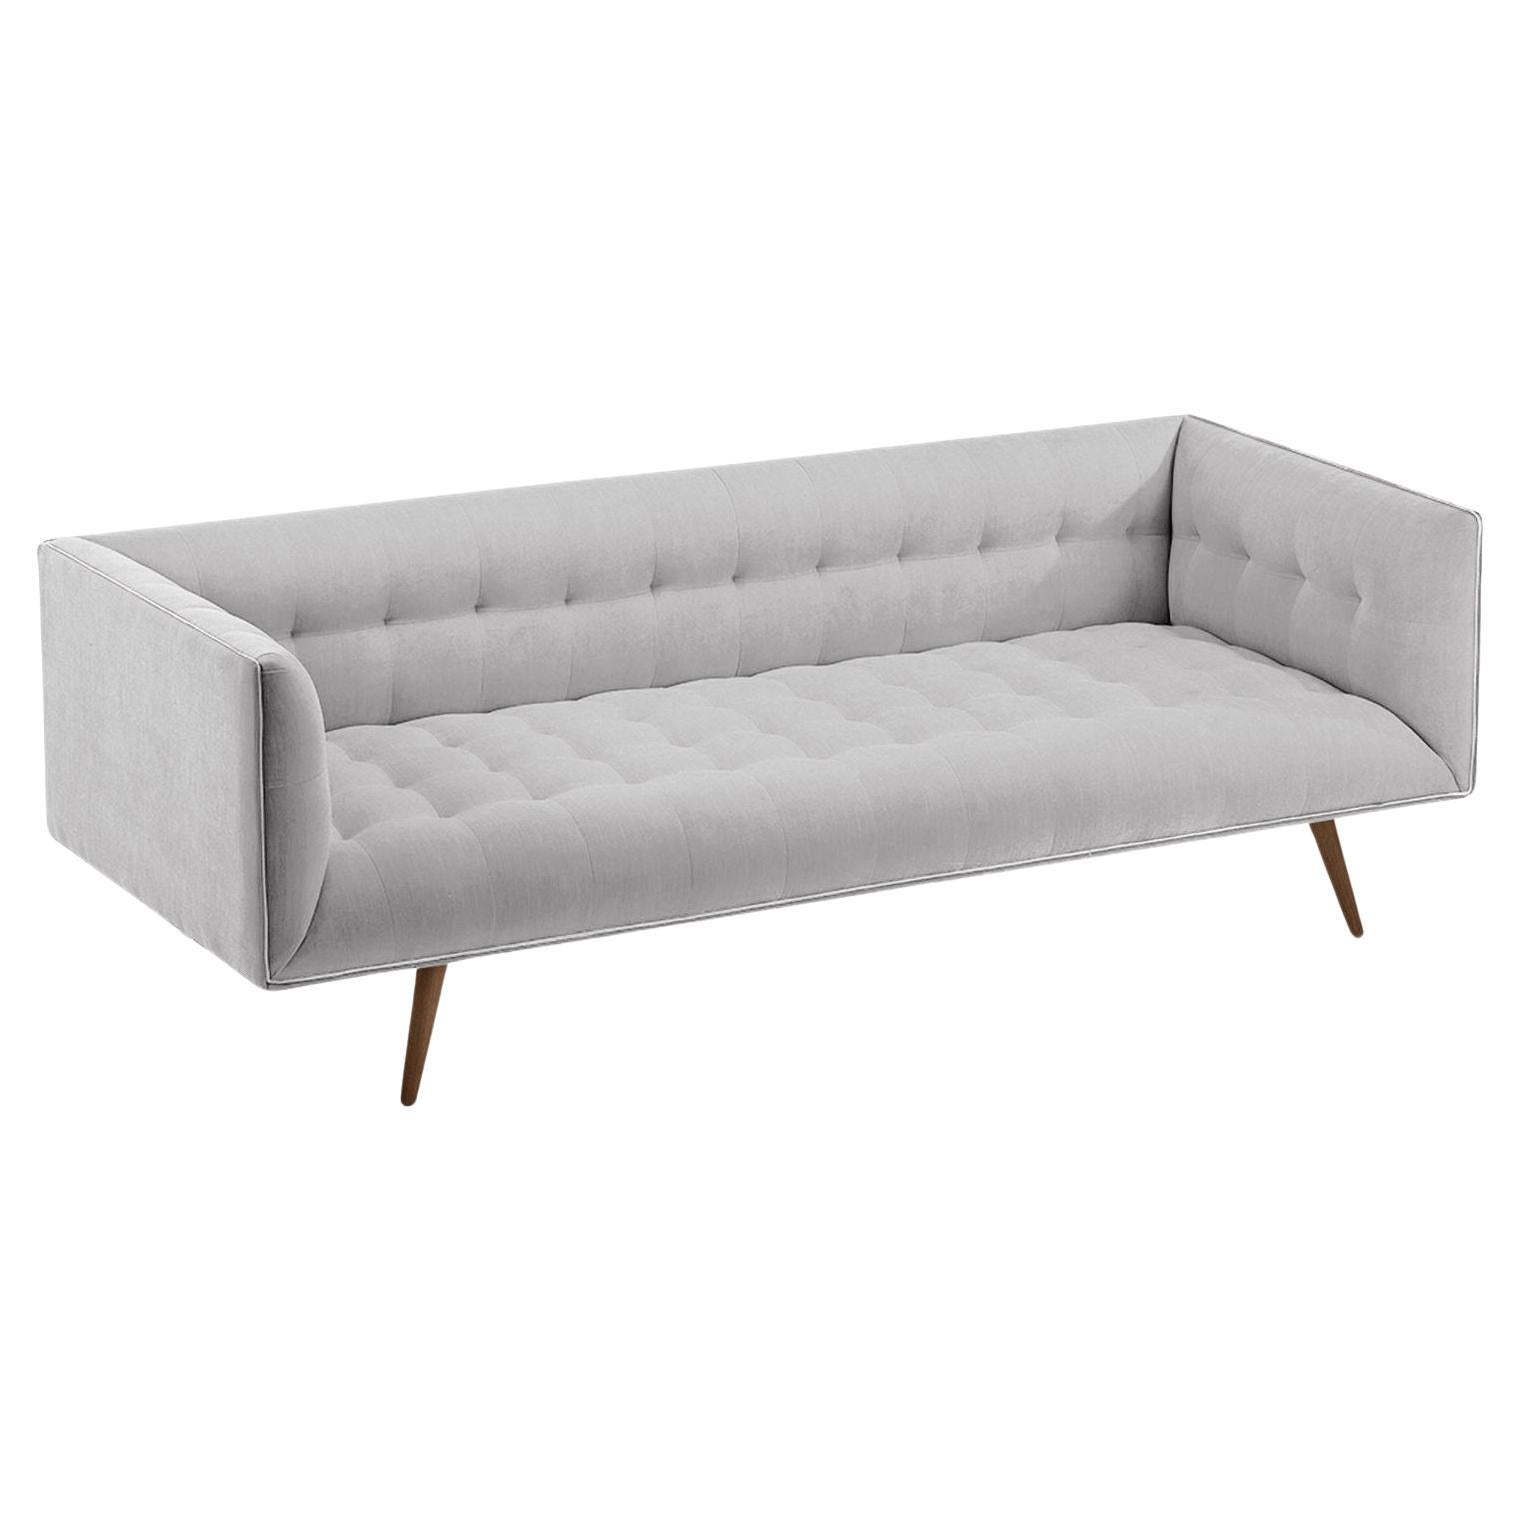 The Dust Sofa is constructed in solid wood, with an elevated tufted elegant look and a comfortable seating. Handmade with a solid wood base and wood legs with a stylish polished brass metal feet detail. Available as an option.

The Dust Sofa is